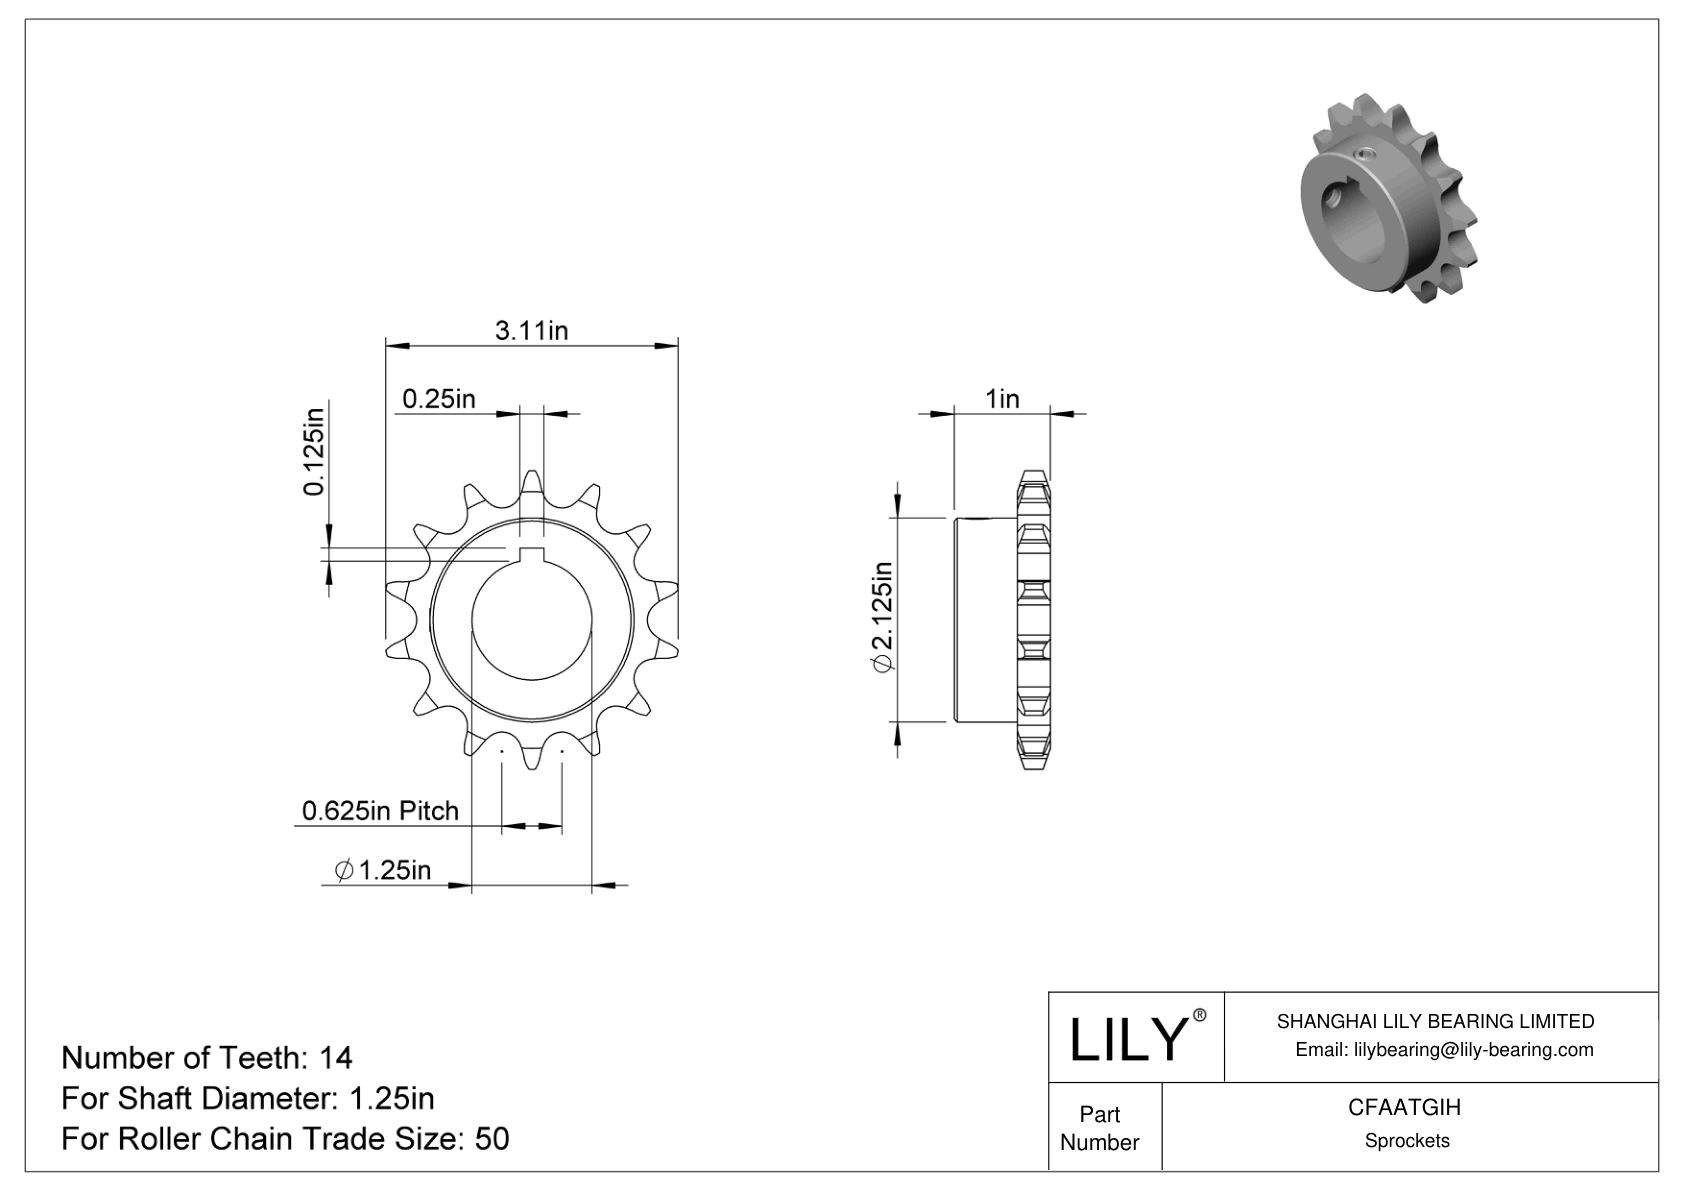 CFAATGIH Wear-Resistant Sprockets for ANSI Roller Chain cad drawing